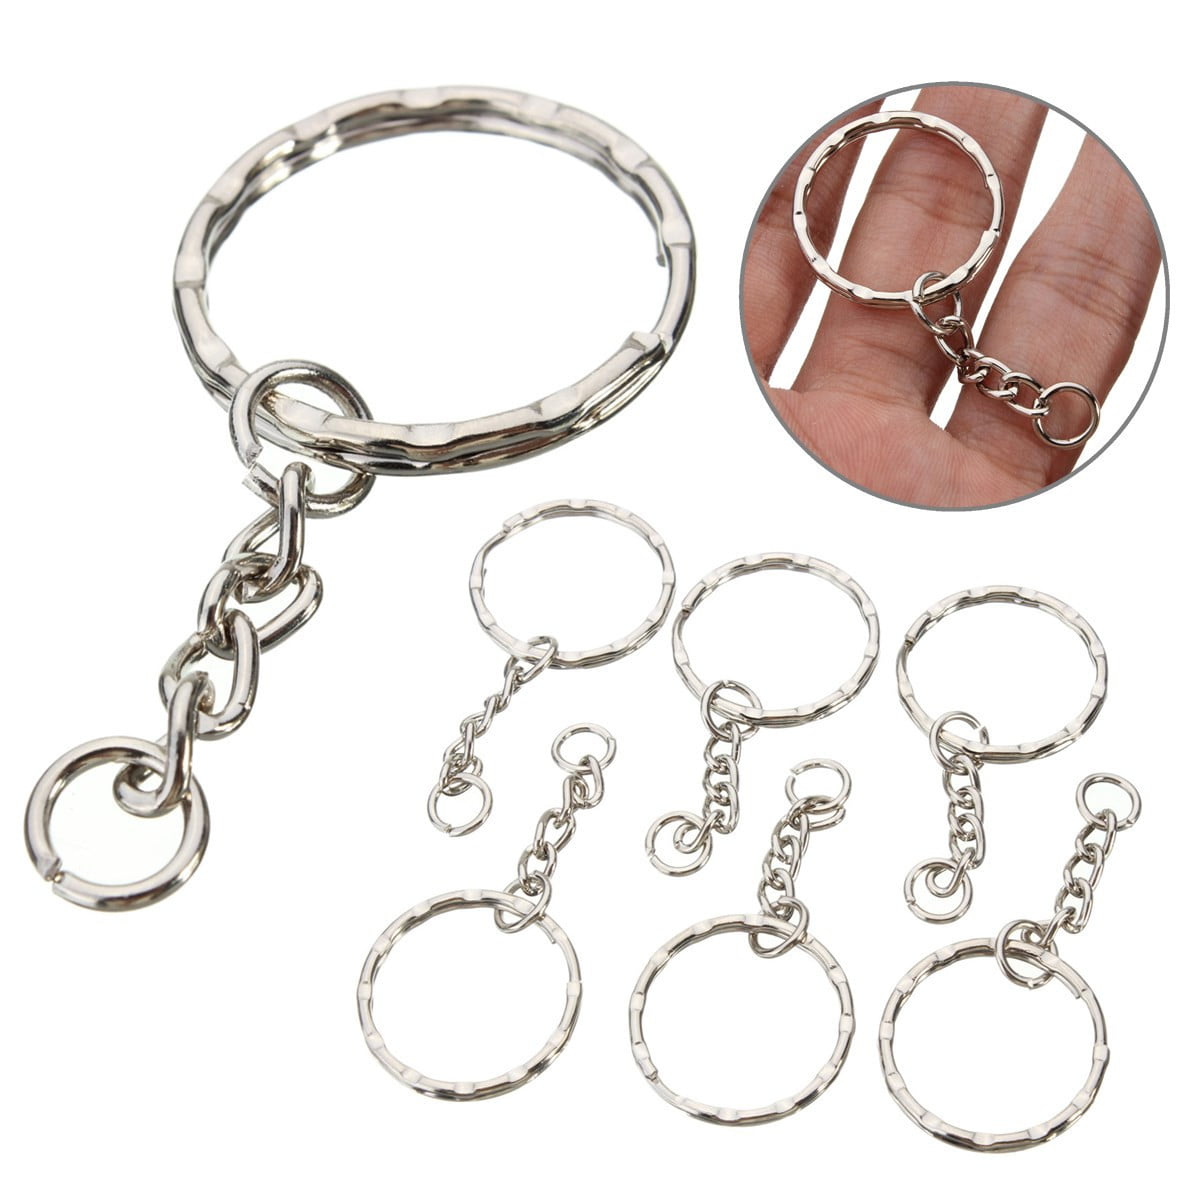 100Pcs Key Ring With Chains Split Ring DIY Keyfob Holder Findings Silver Charms 